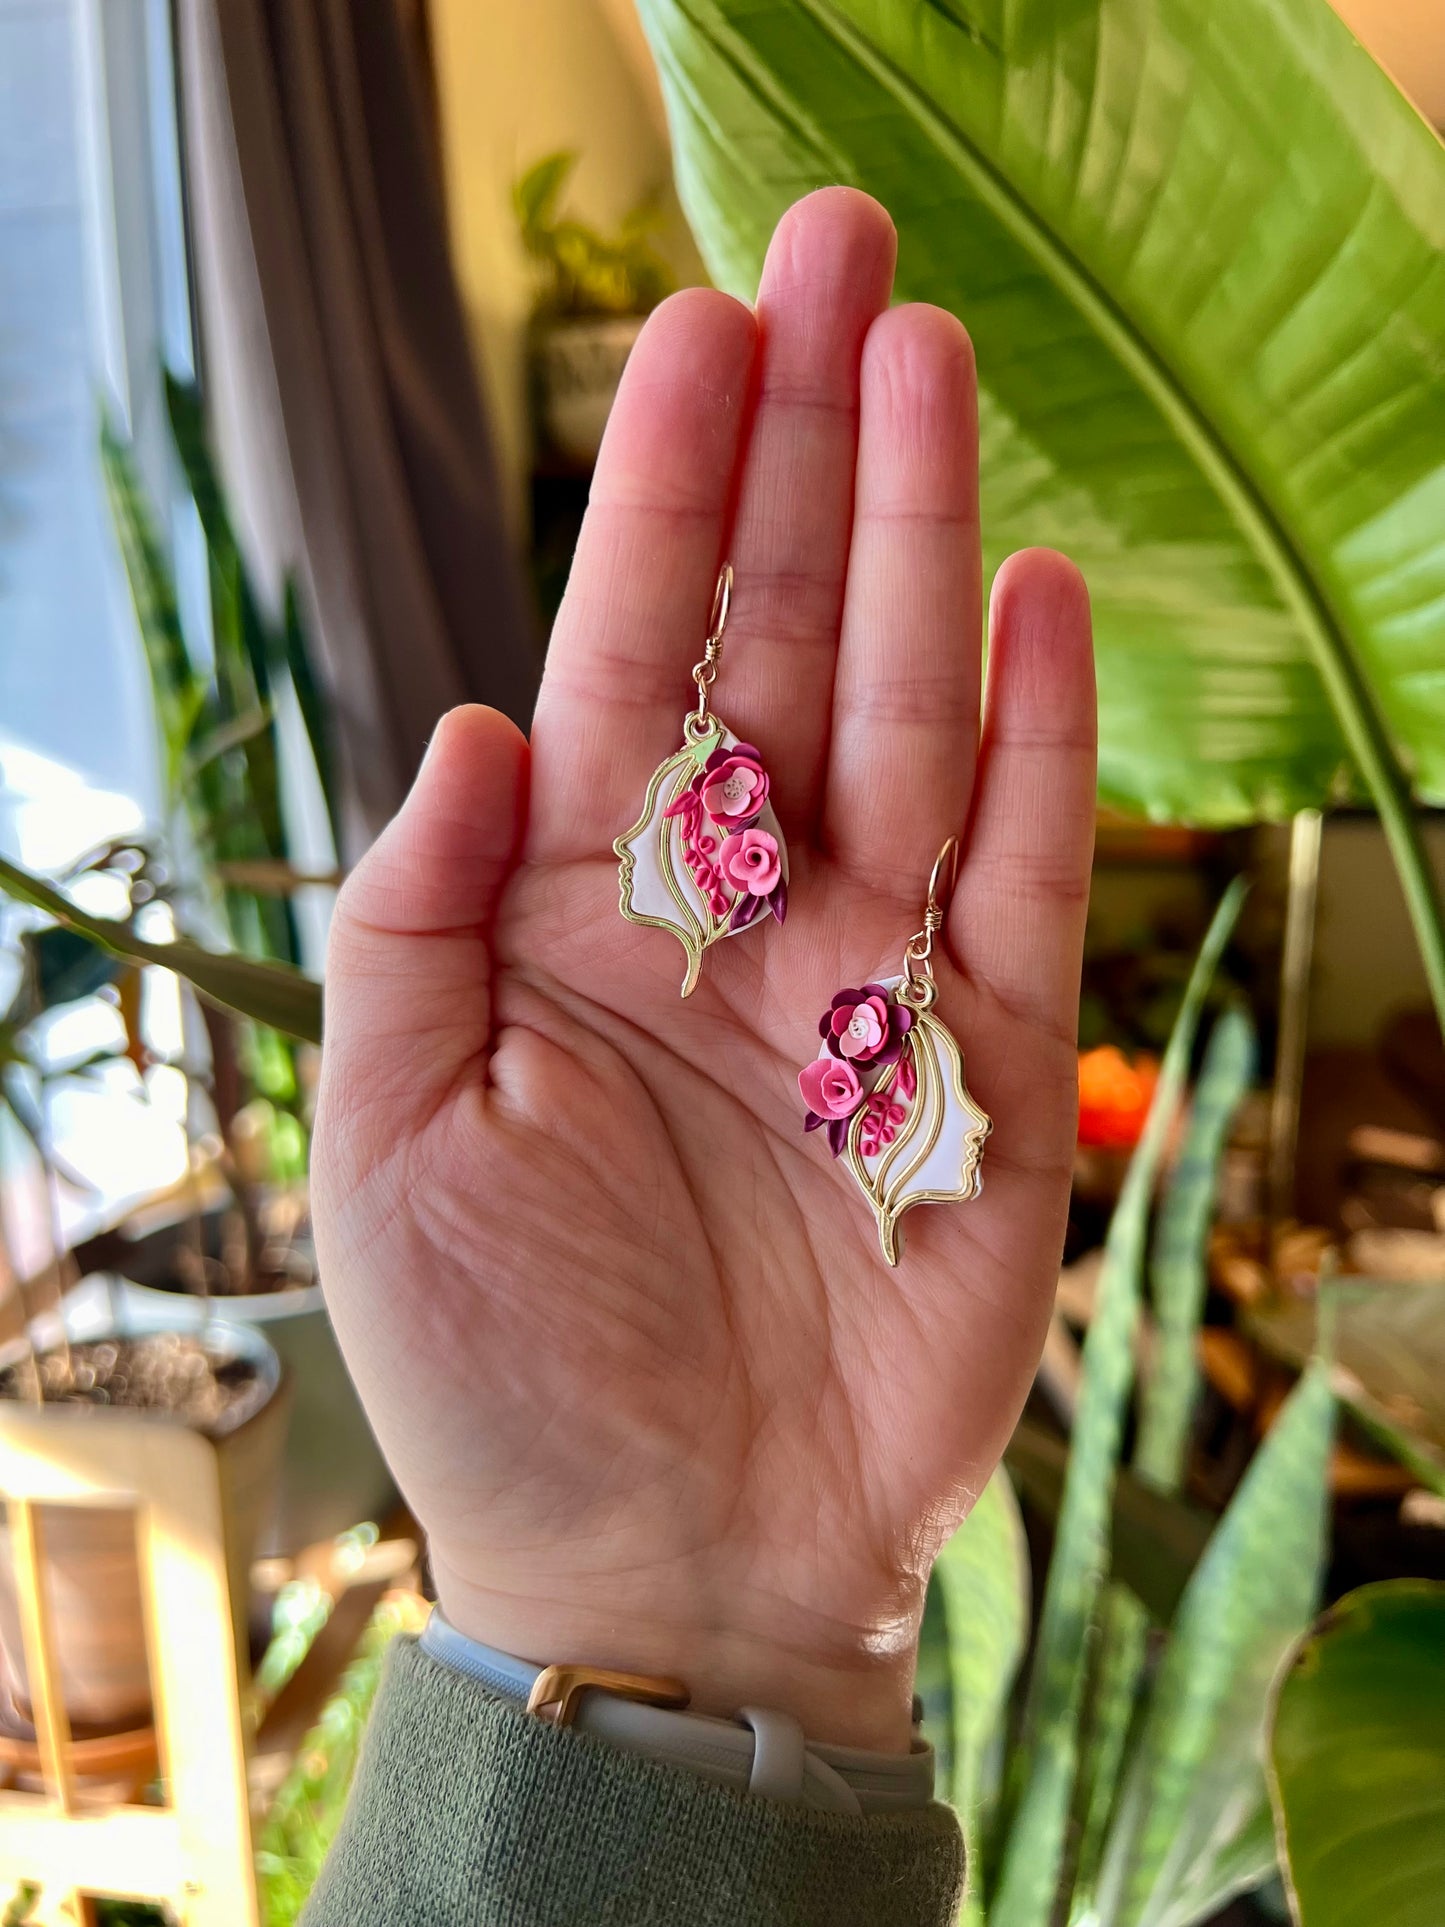 Channel the power of Freyja with these polymer clay earrings. Handcrafted with care, each pink flower represents the Norse goddess's attributes of love, fertility, and war. Enjoy hypoallergenic comfort with 14k gold-filled findings.